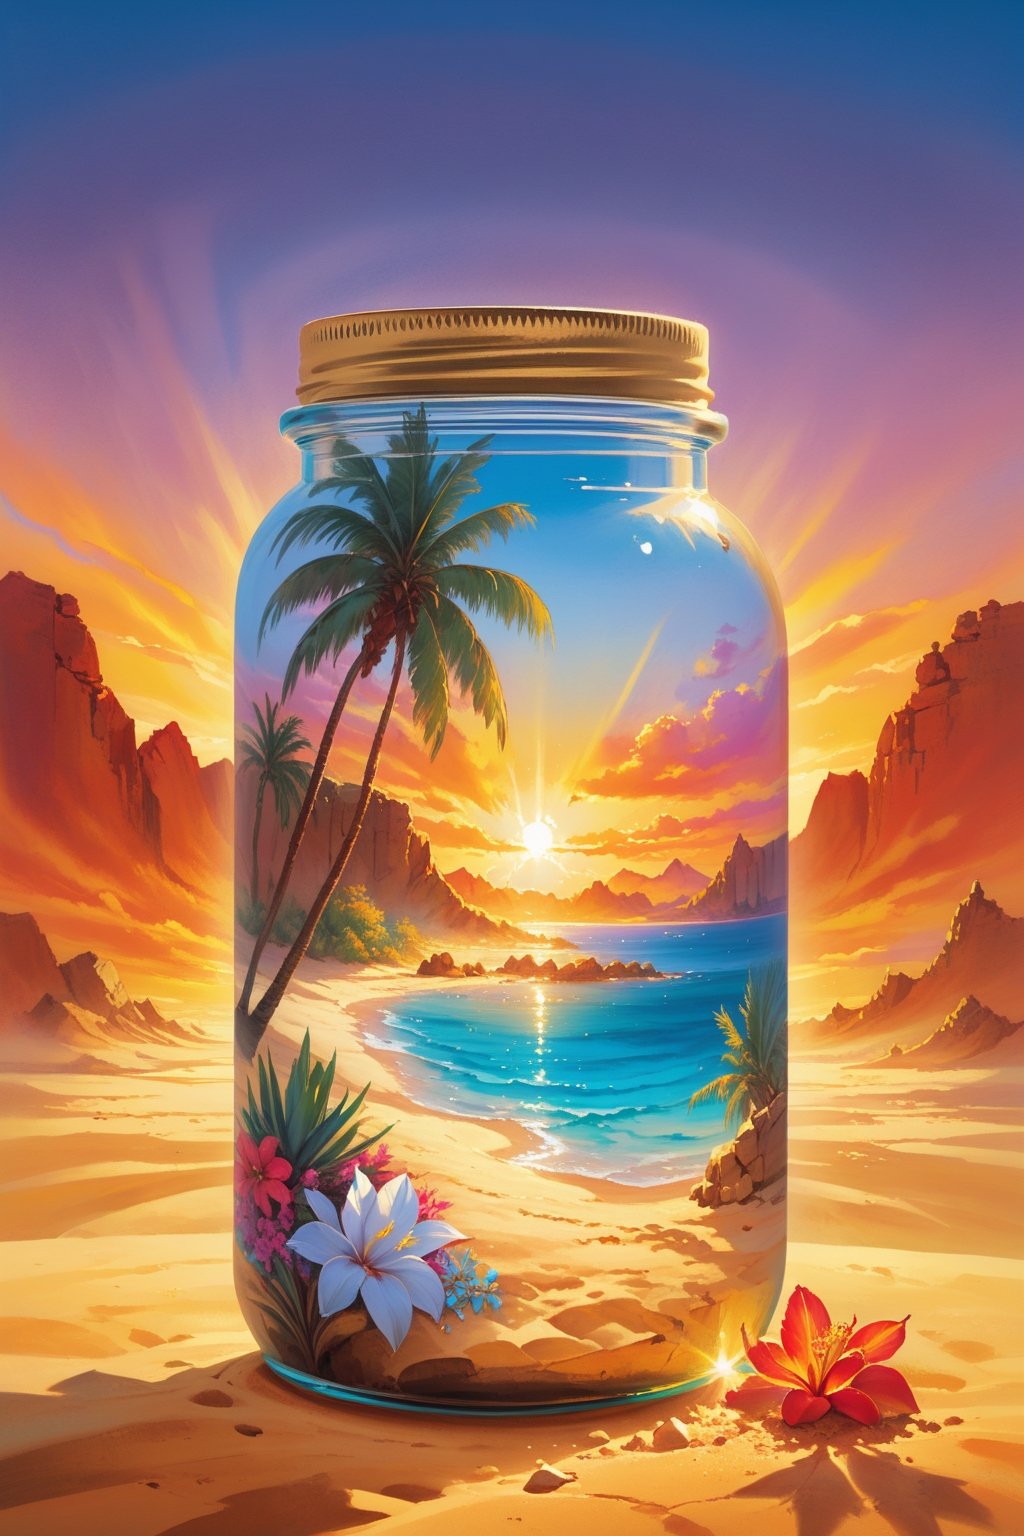 Desert oasis, palm trees casting long shadows in the golden sand, crystal clear water reflecting the vibrant colors of the sunset, exotic flowers blooming around, ancient ruins peeking through the palm leaves, tranquil and mystical atmosphere, painting style capturing the essence of oasis serenity.,painted world,in a jar